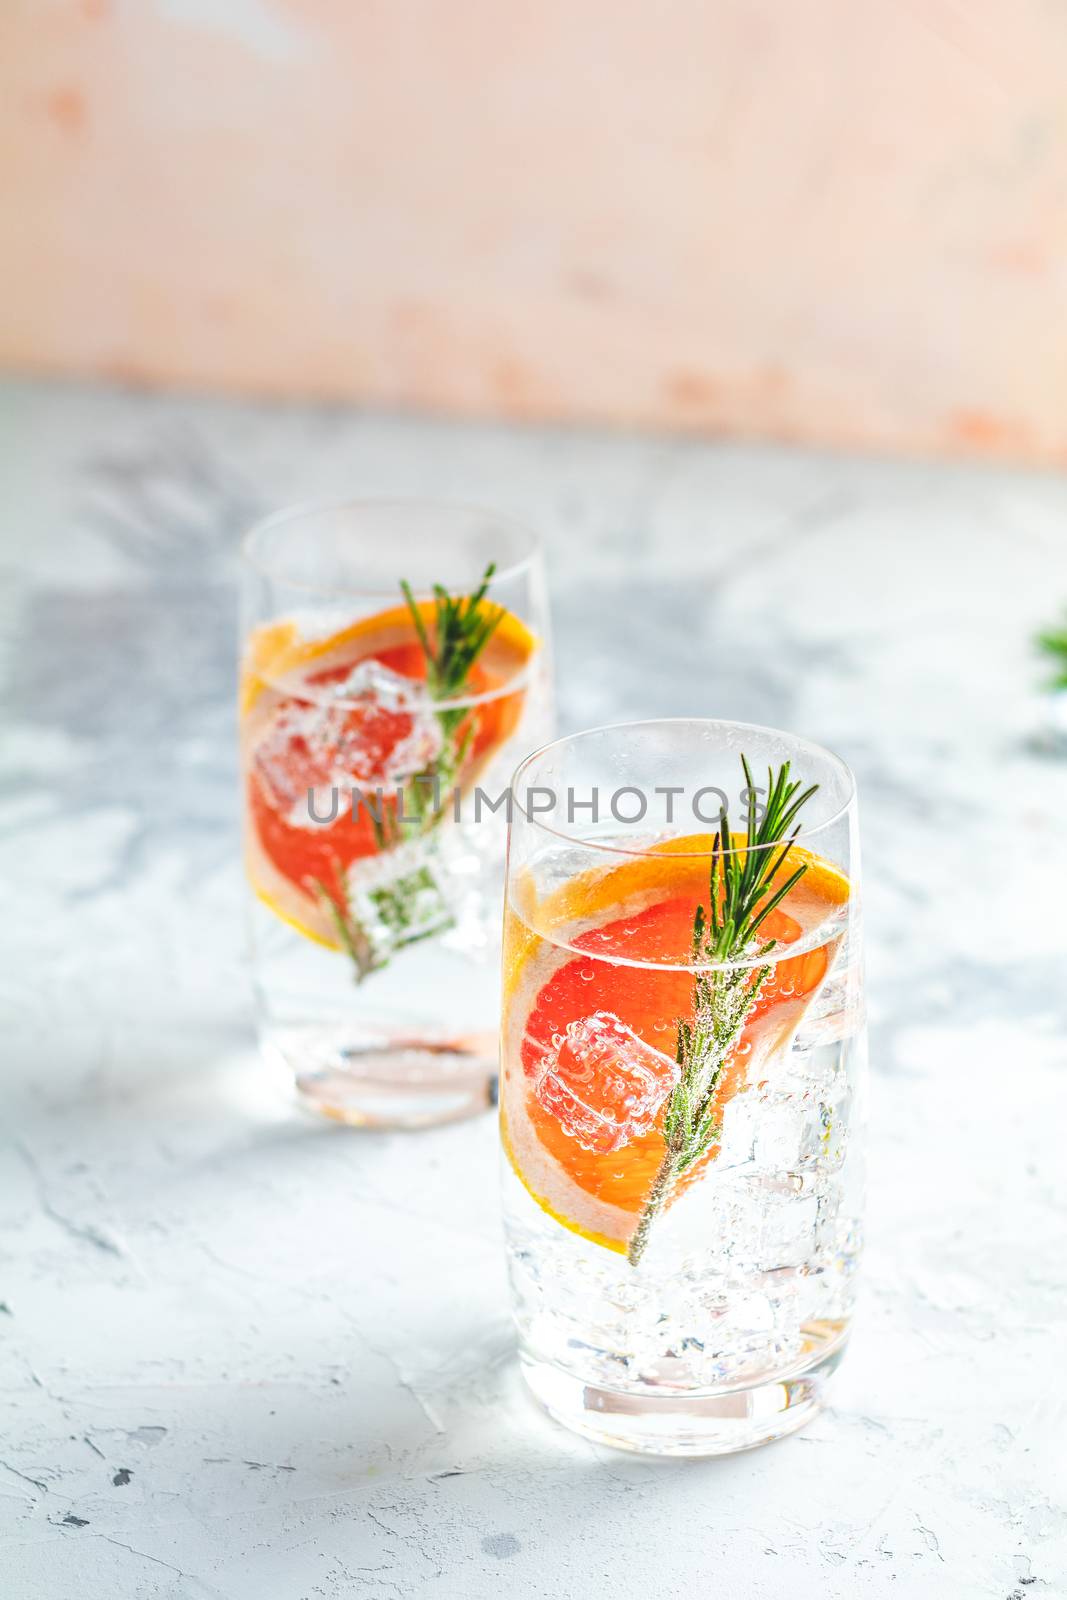 Alcoholic cocktail with grapefruit, soda, ice, gin and rosemary by ArtSvitlyna